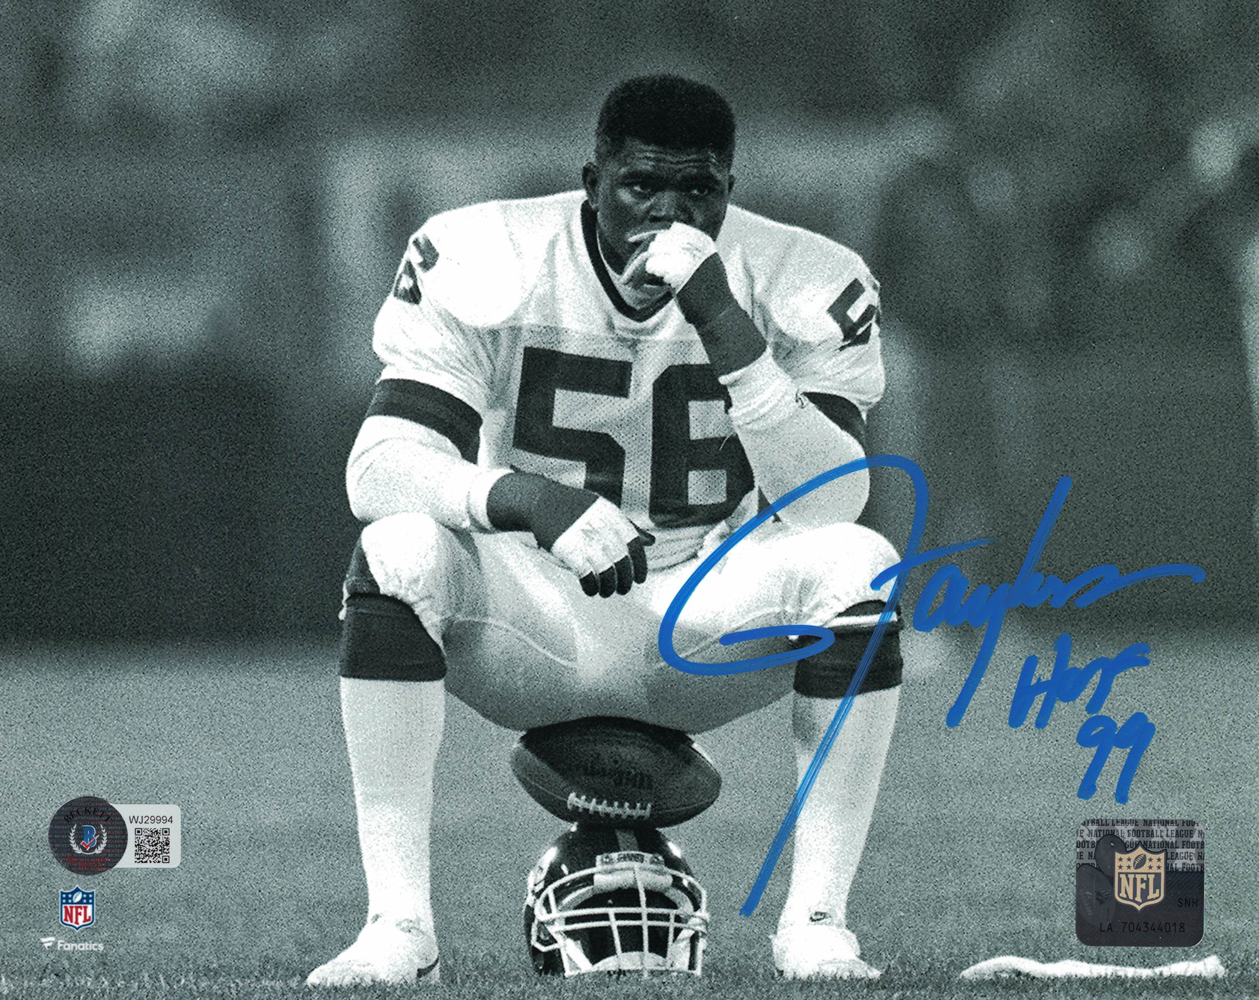 Lawrence Taylor Autographed/Signed New York Giants 8x10 Photo HOF BAS